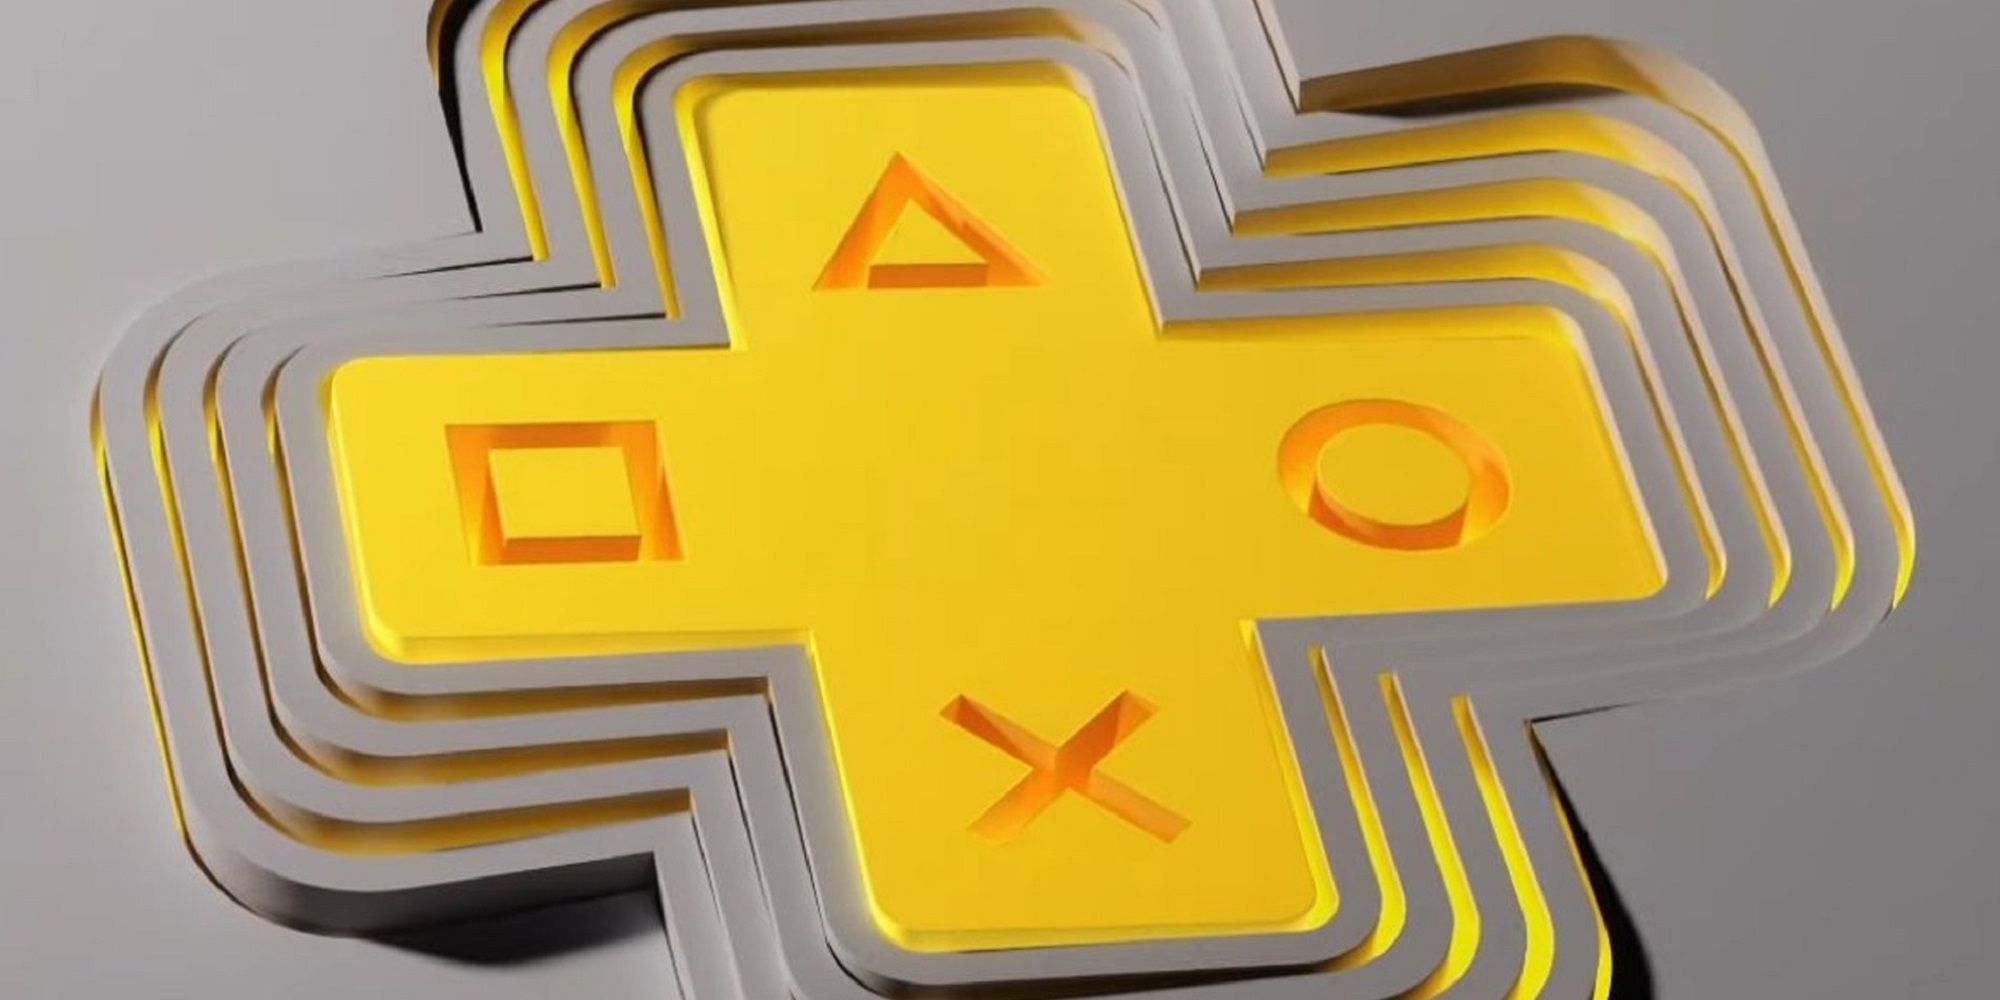 Sony to hike 12-month PlayStation Plus subscriptions by up to $40